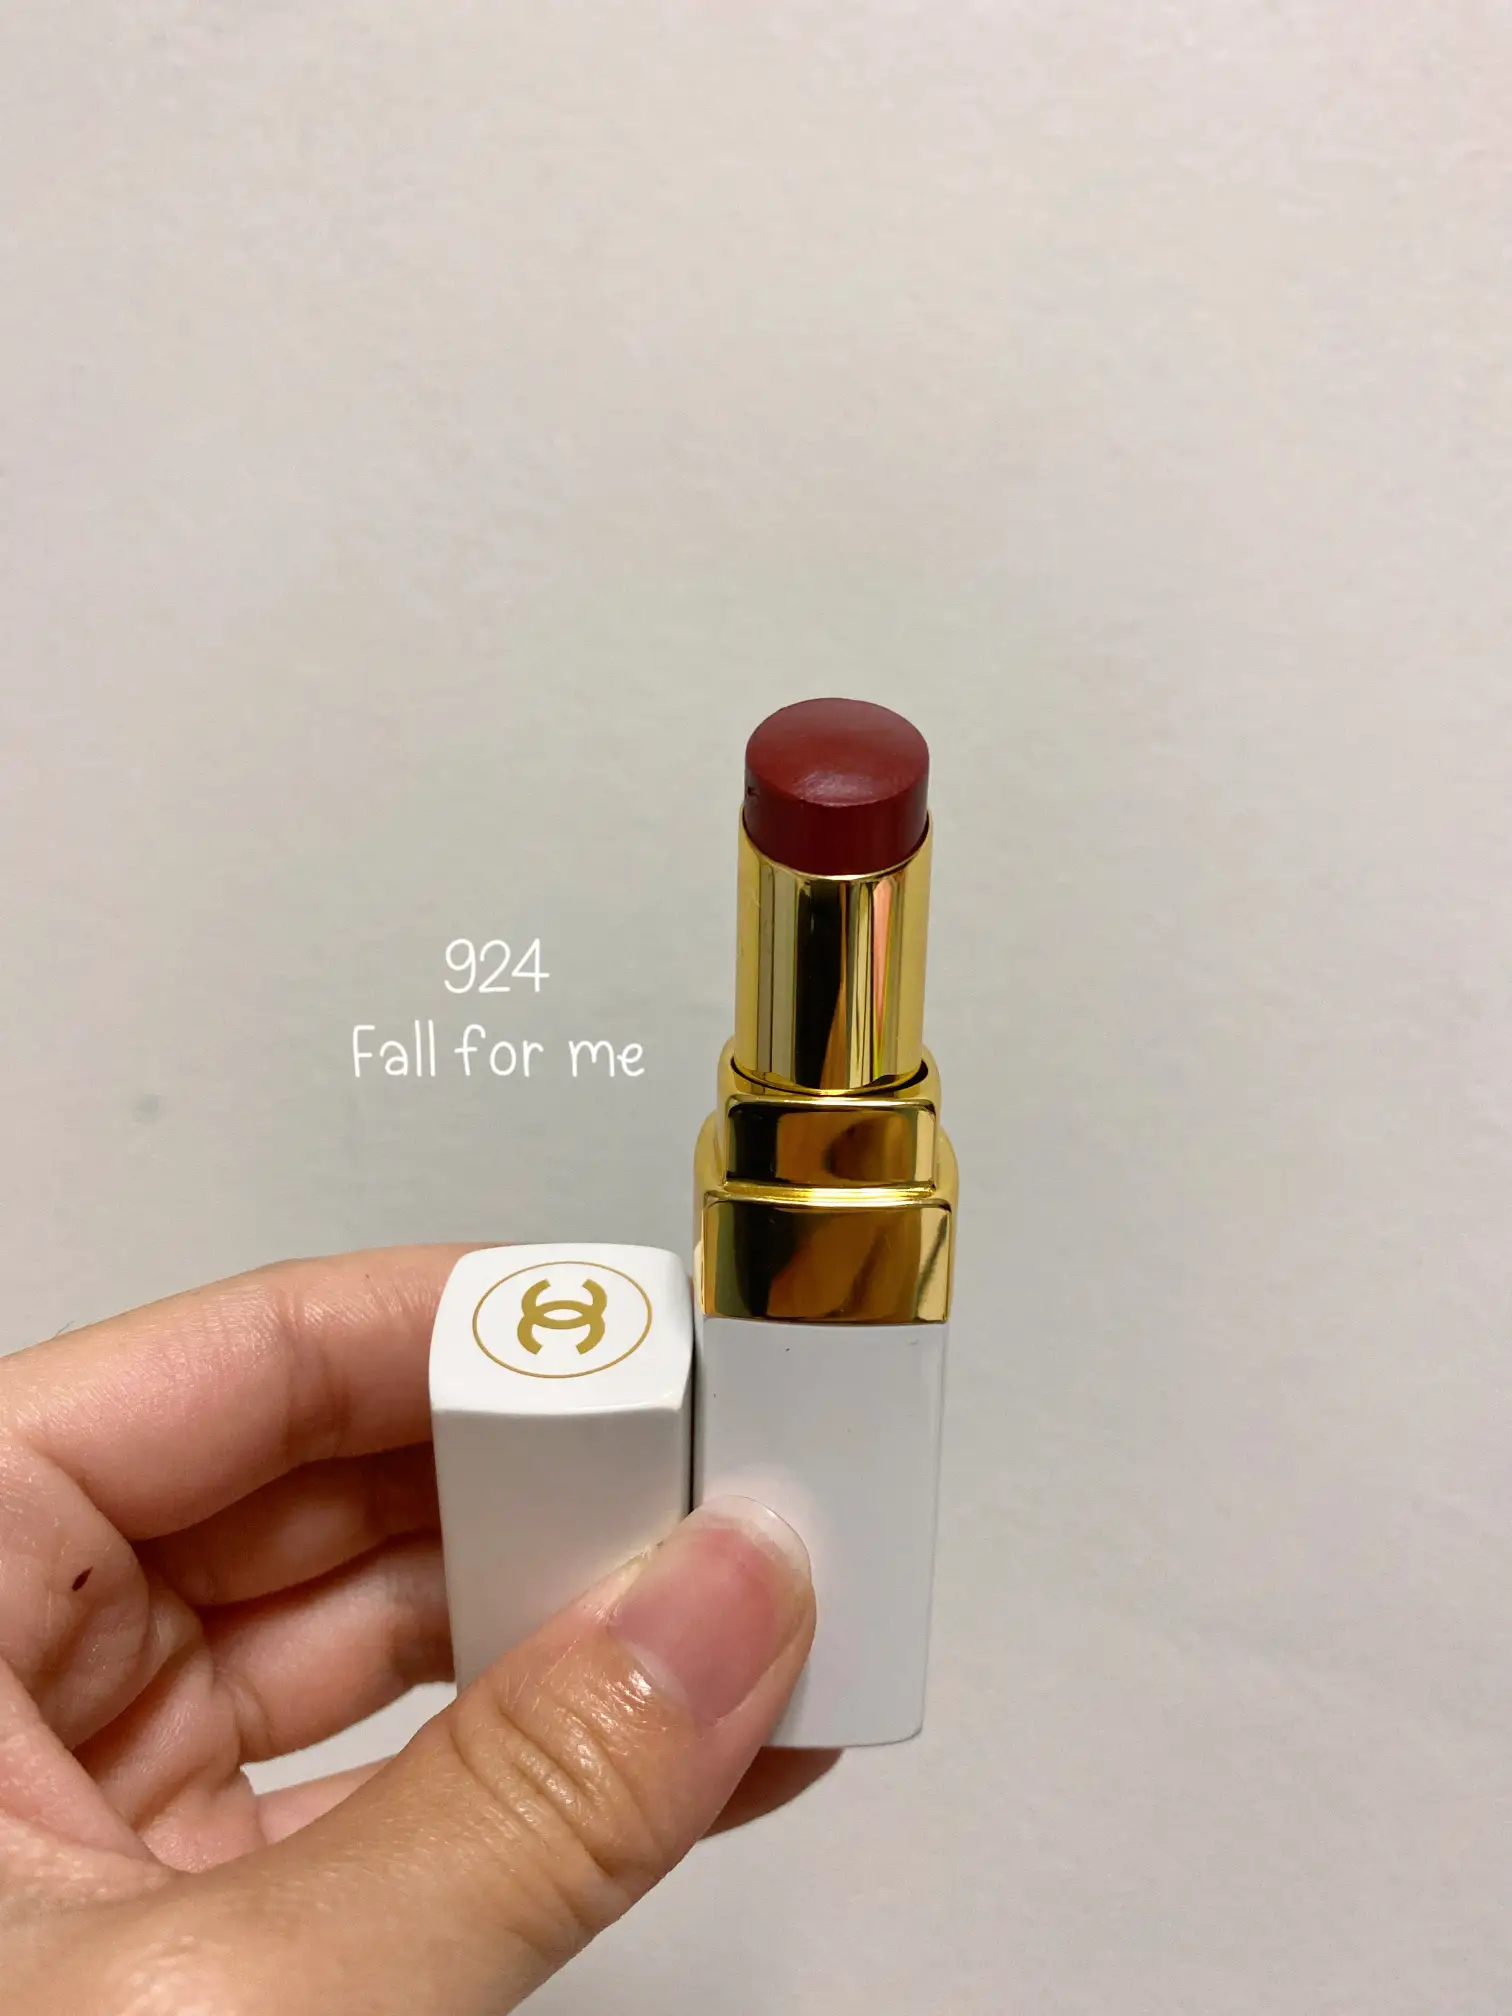 CHANEL LIP BARM • fall for me 924 •, Gallery posted by Maiipoint